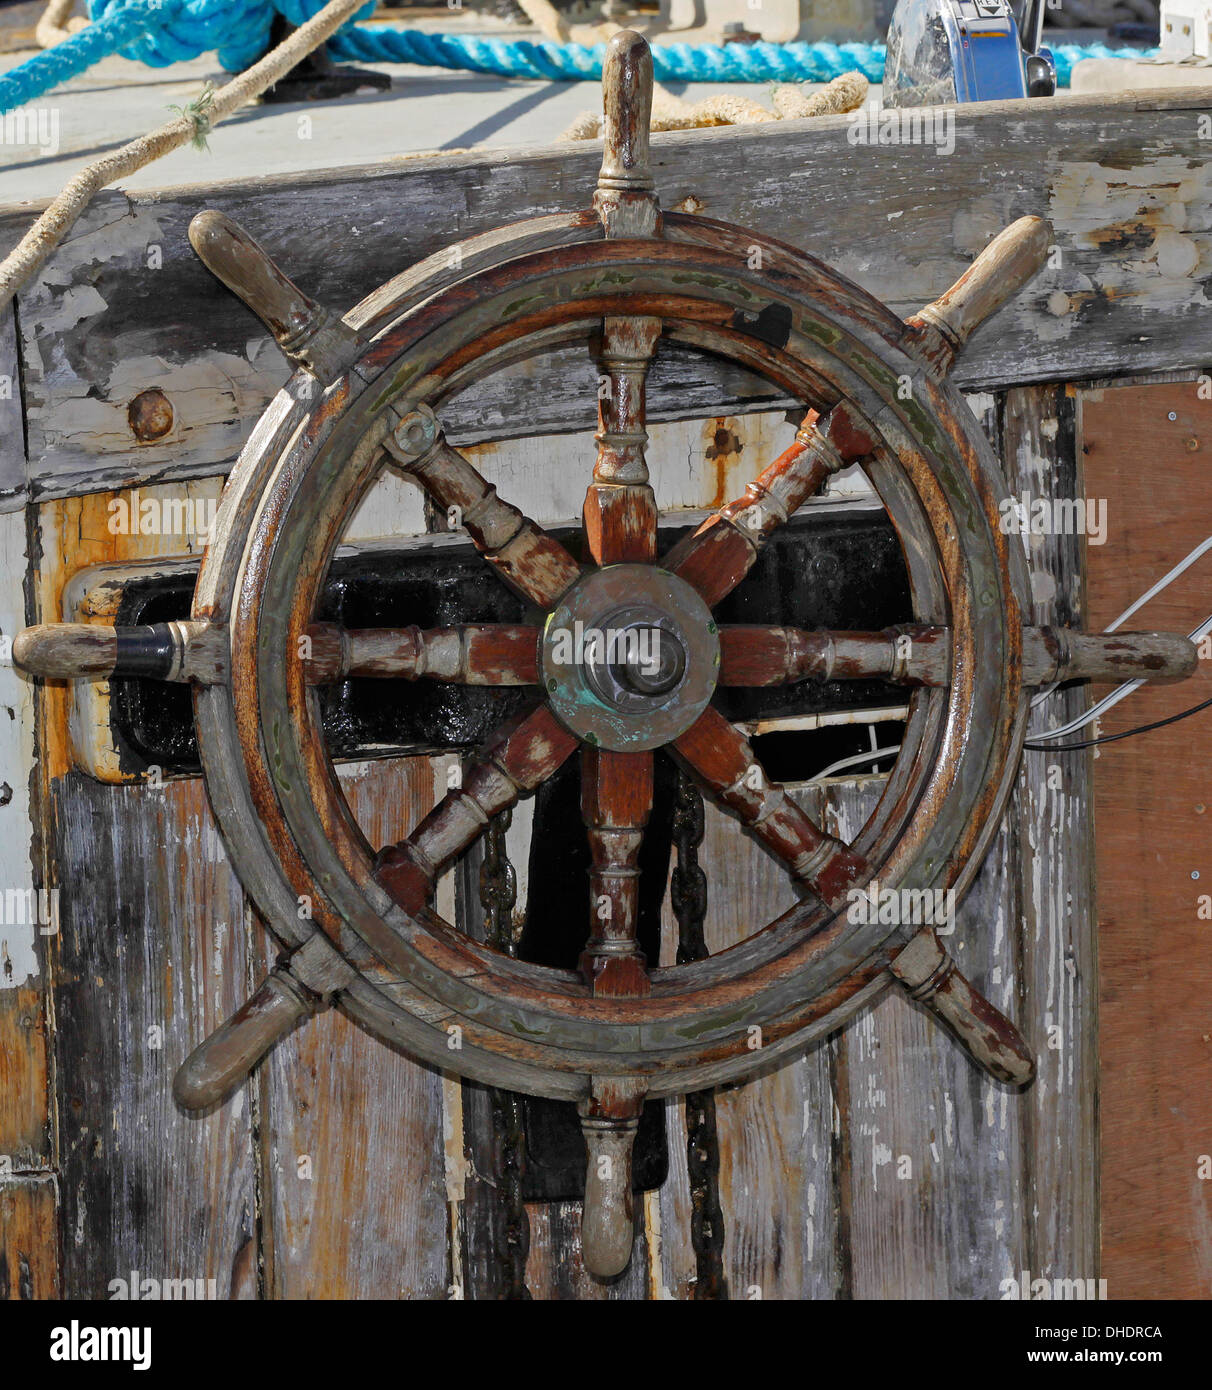 The weather beaten wooden steering wheel of an old boat Stock Photo